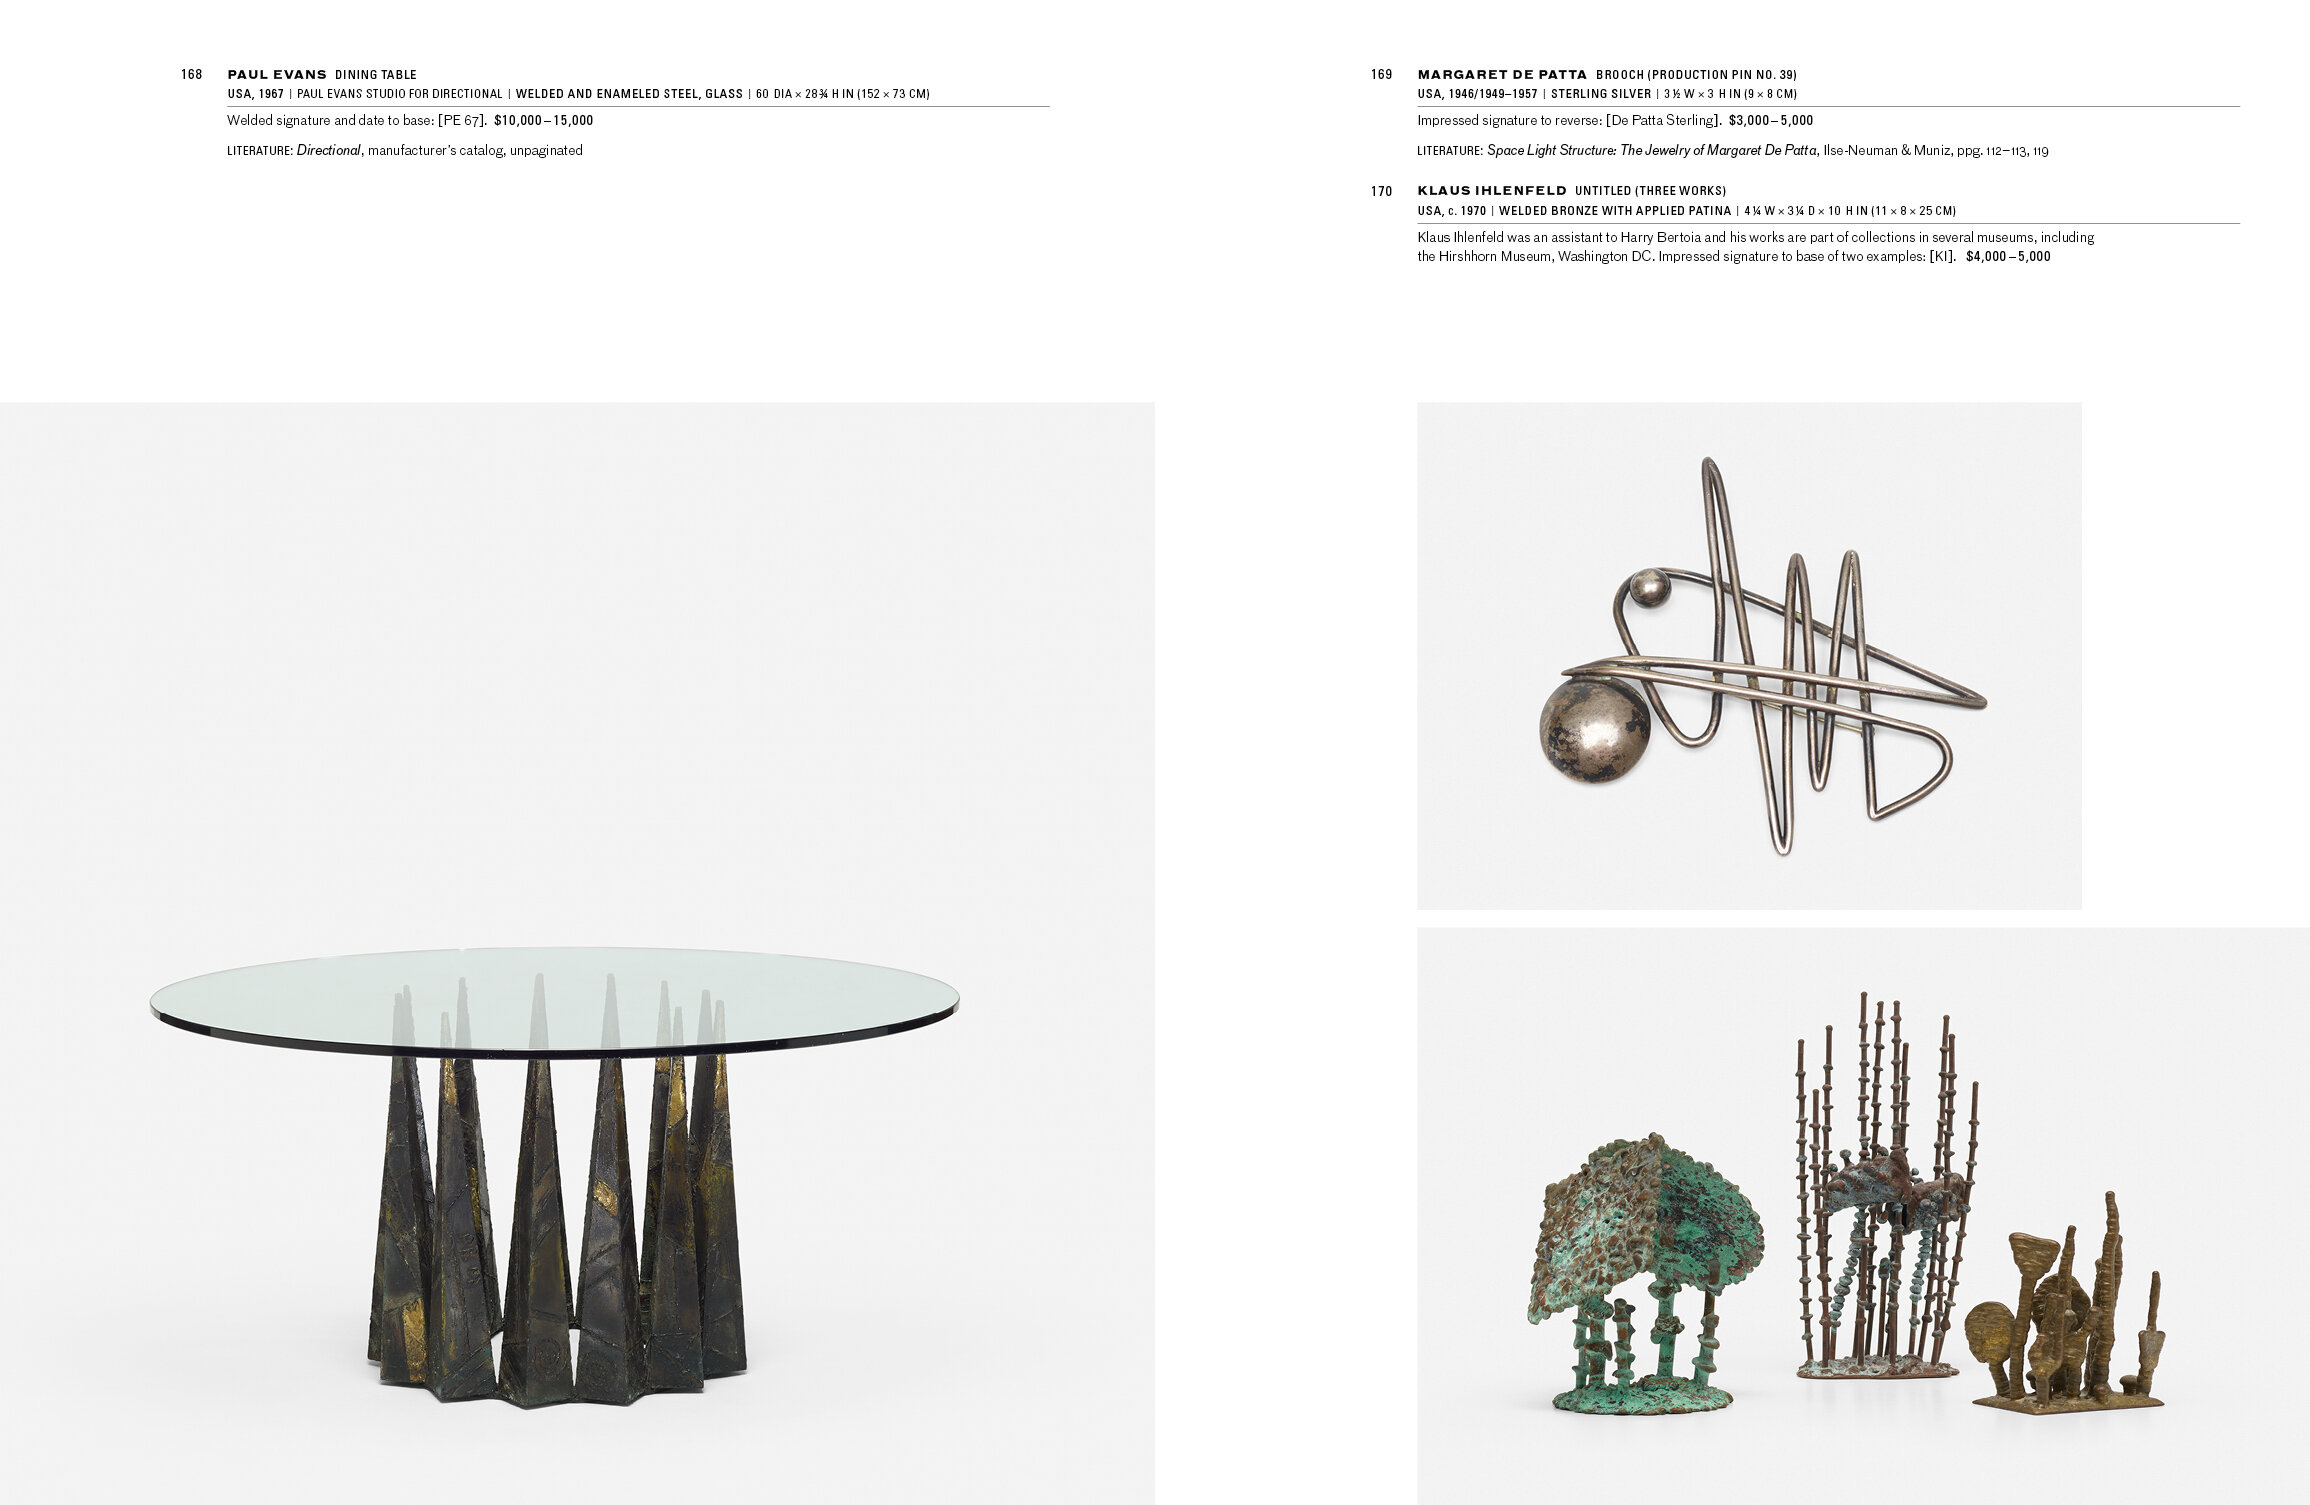 View or download the Design catalog. | Wright: Auctions of Art and